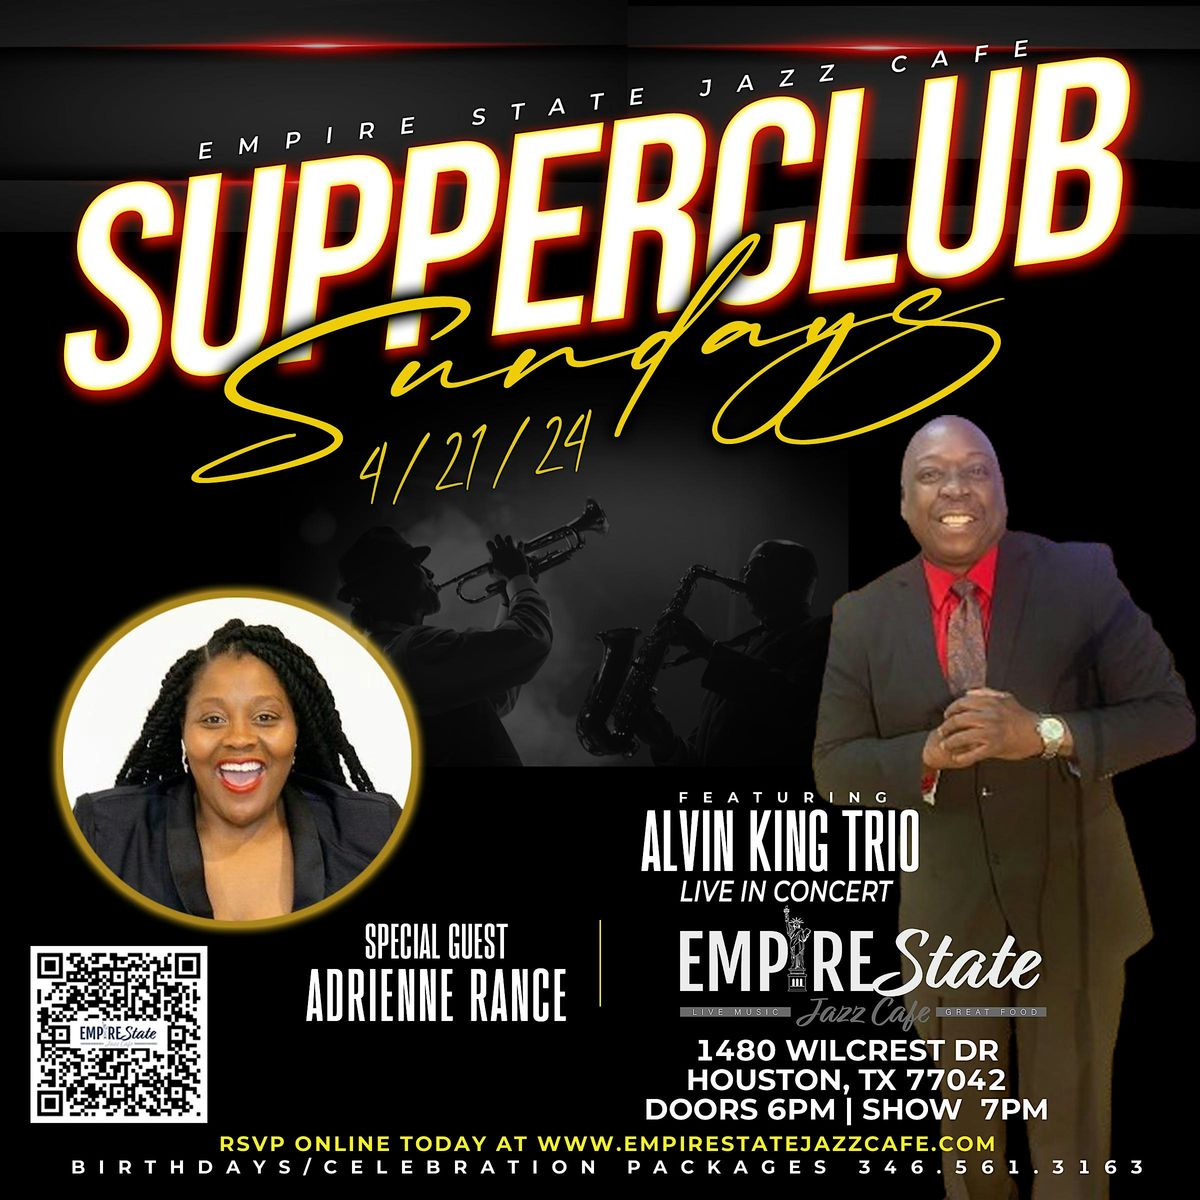 4\/21- Supper Club Sundays with Alvin King Trio feat Adrienne Rance